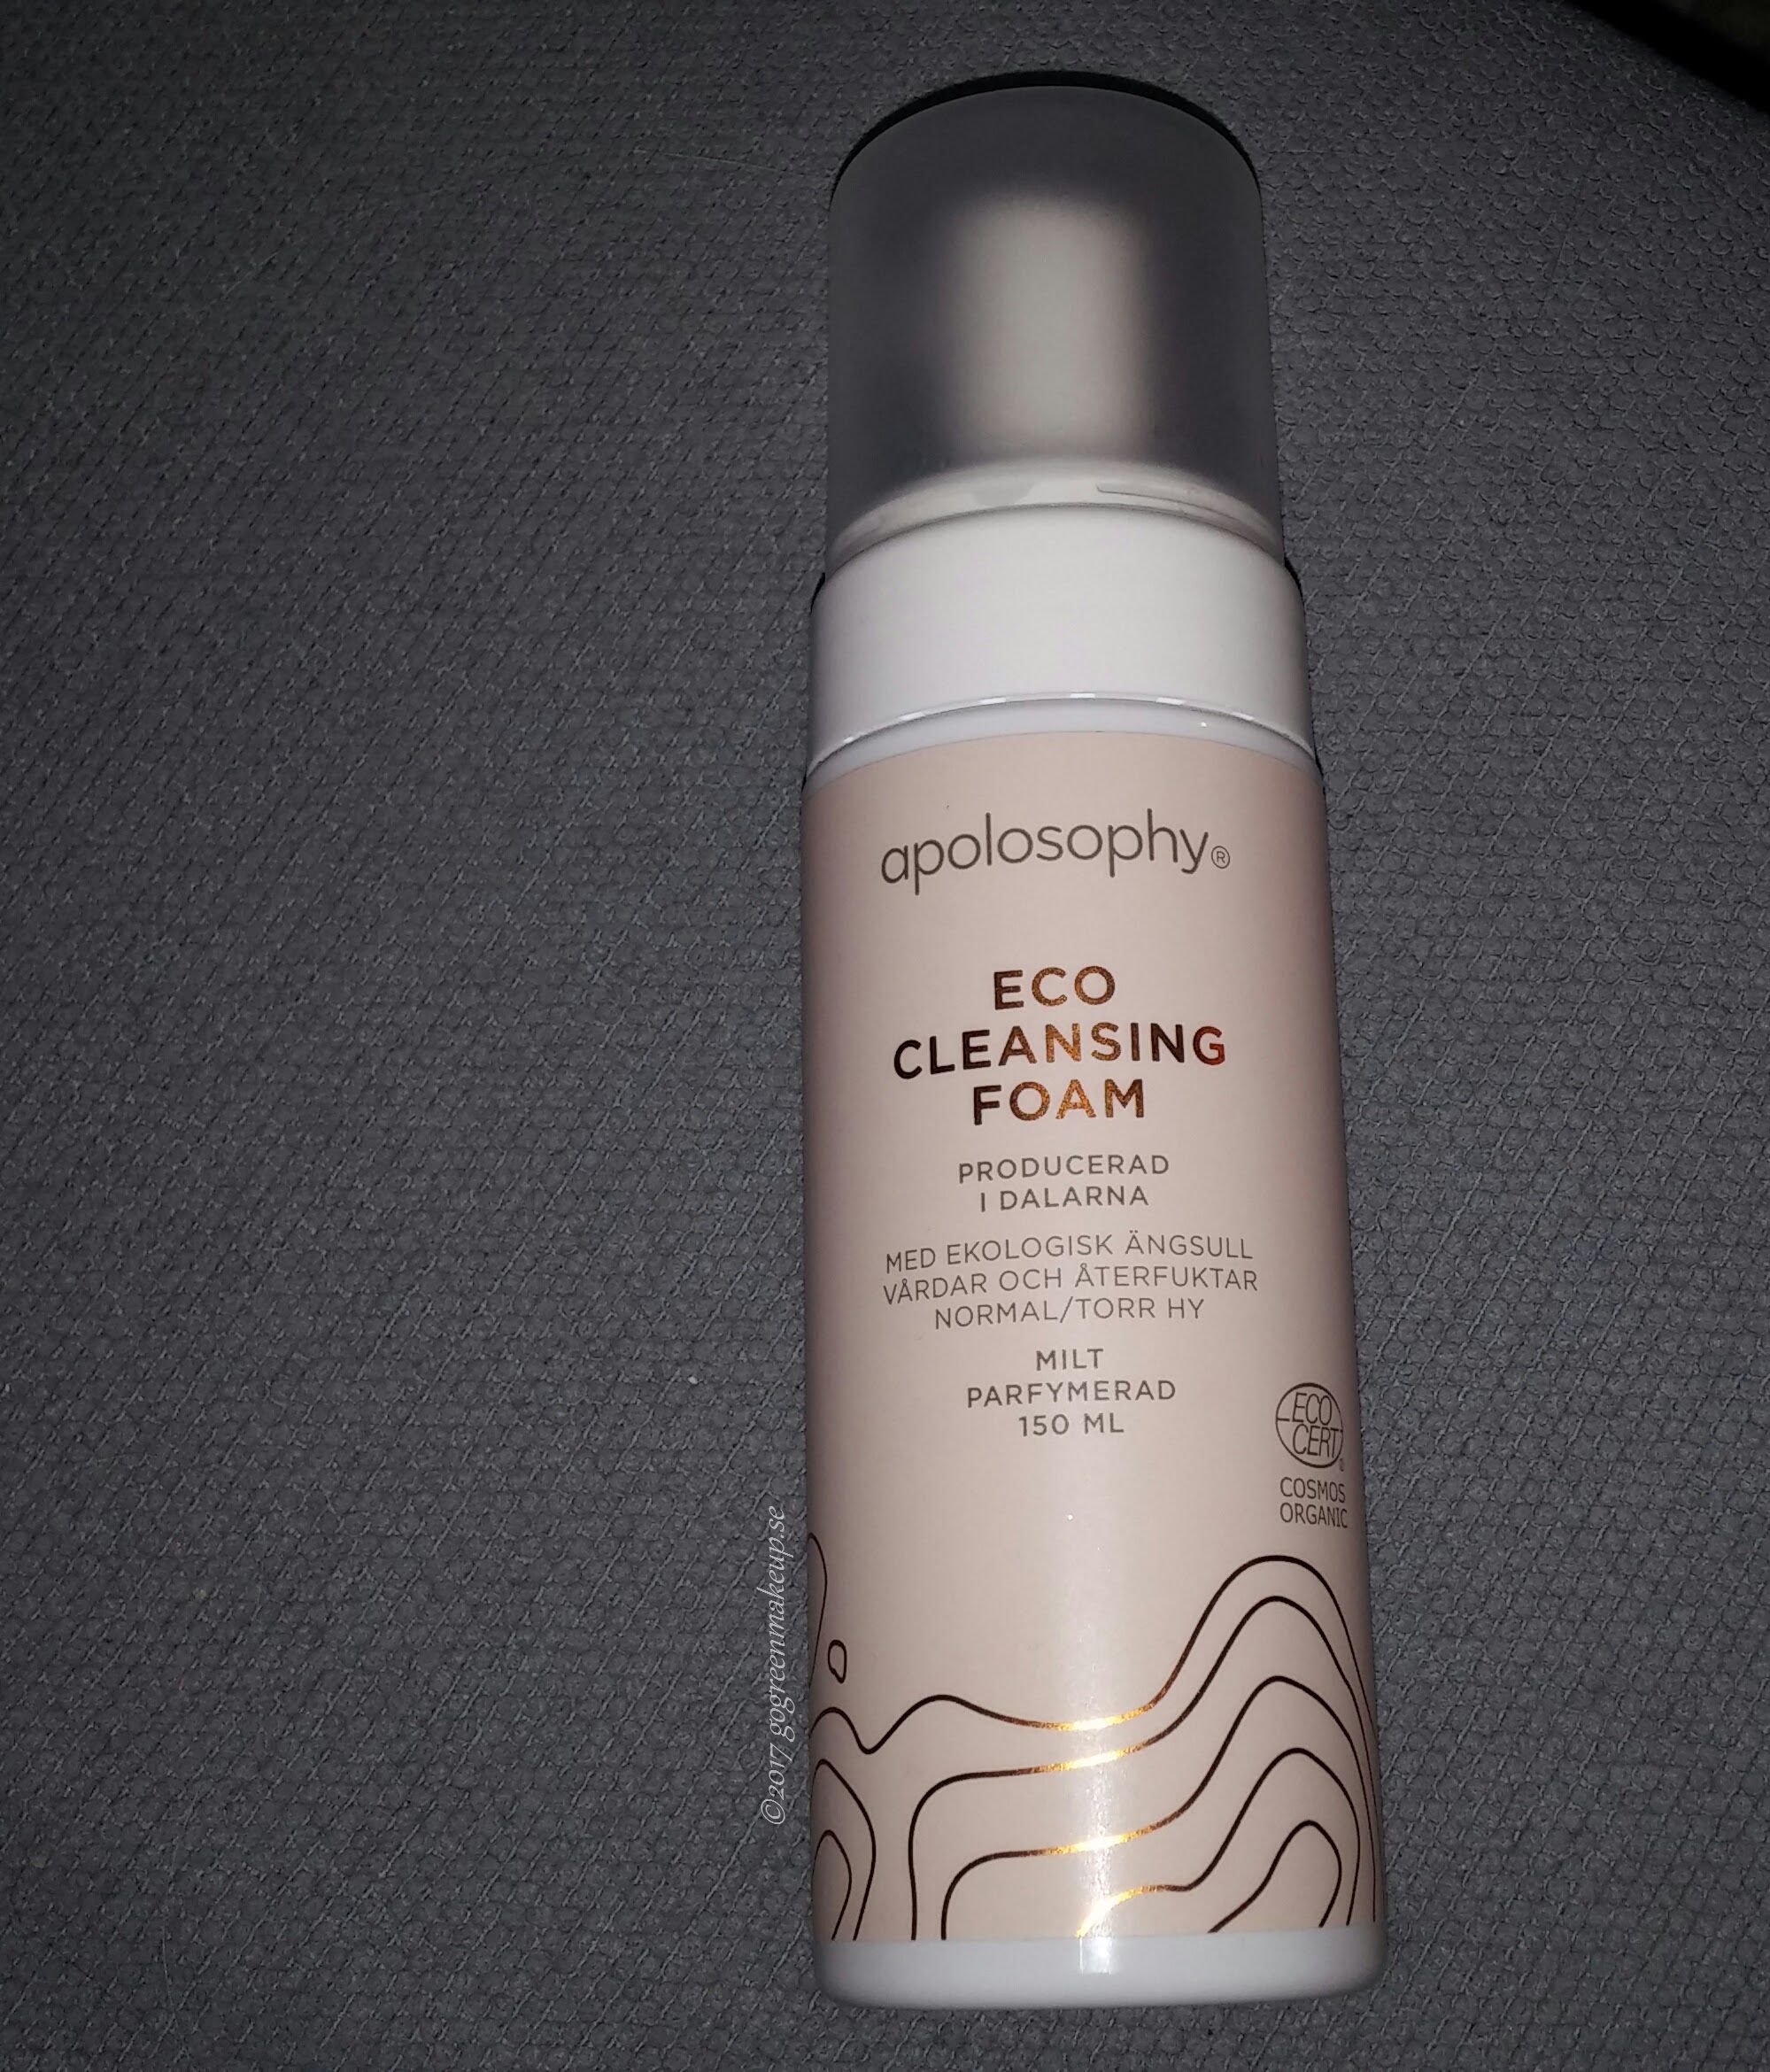 Apolosophy Eco Cleansing Foam